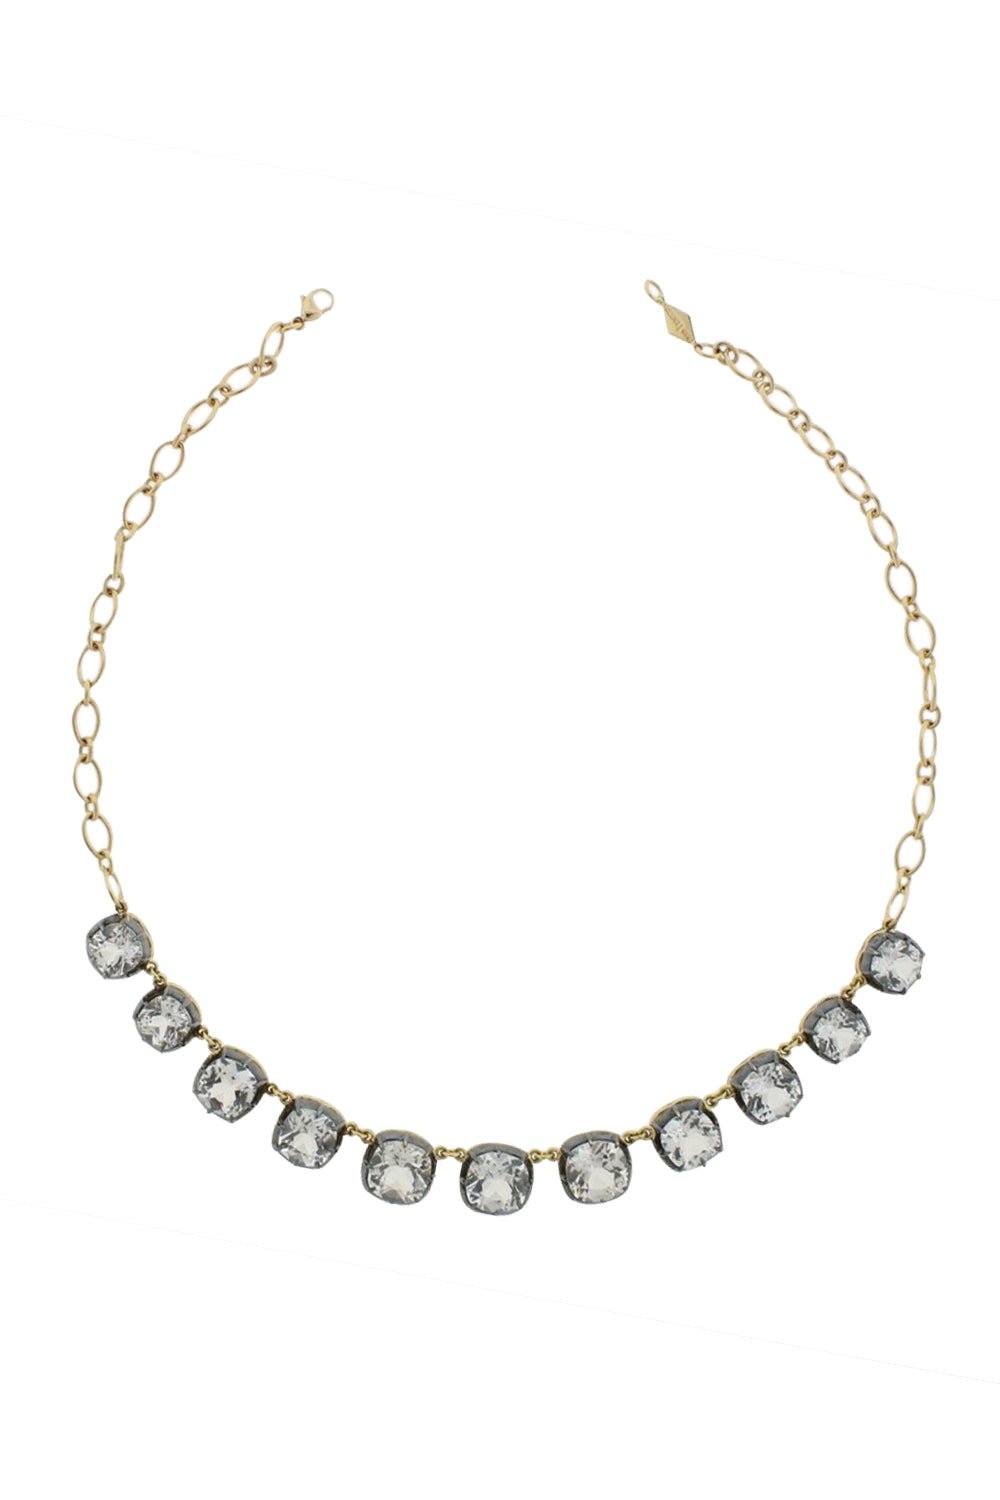 FRED LEIGHTON-Collet Semi-Riviere Necklace-YELLOW GOLD